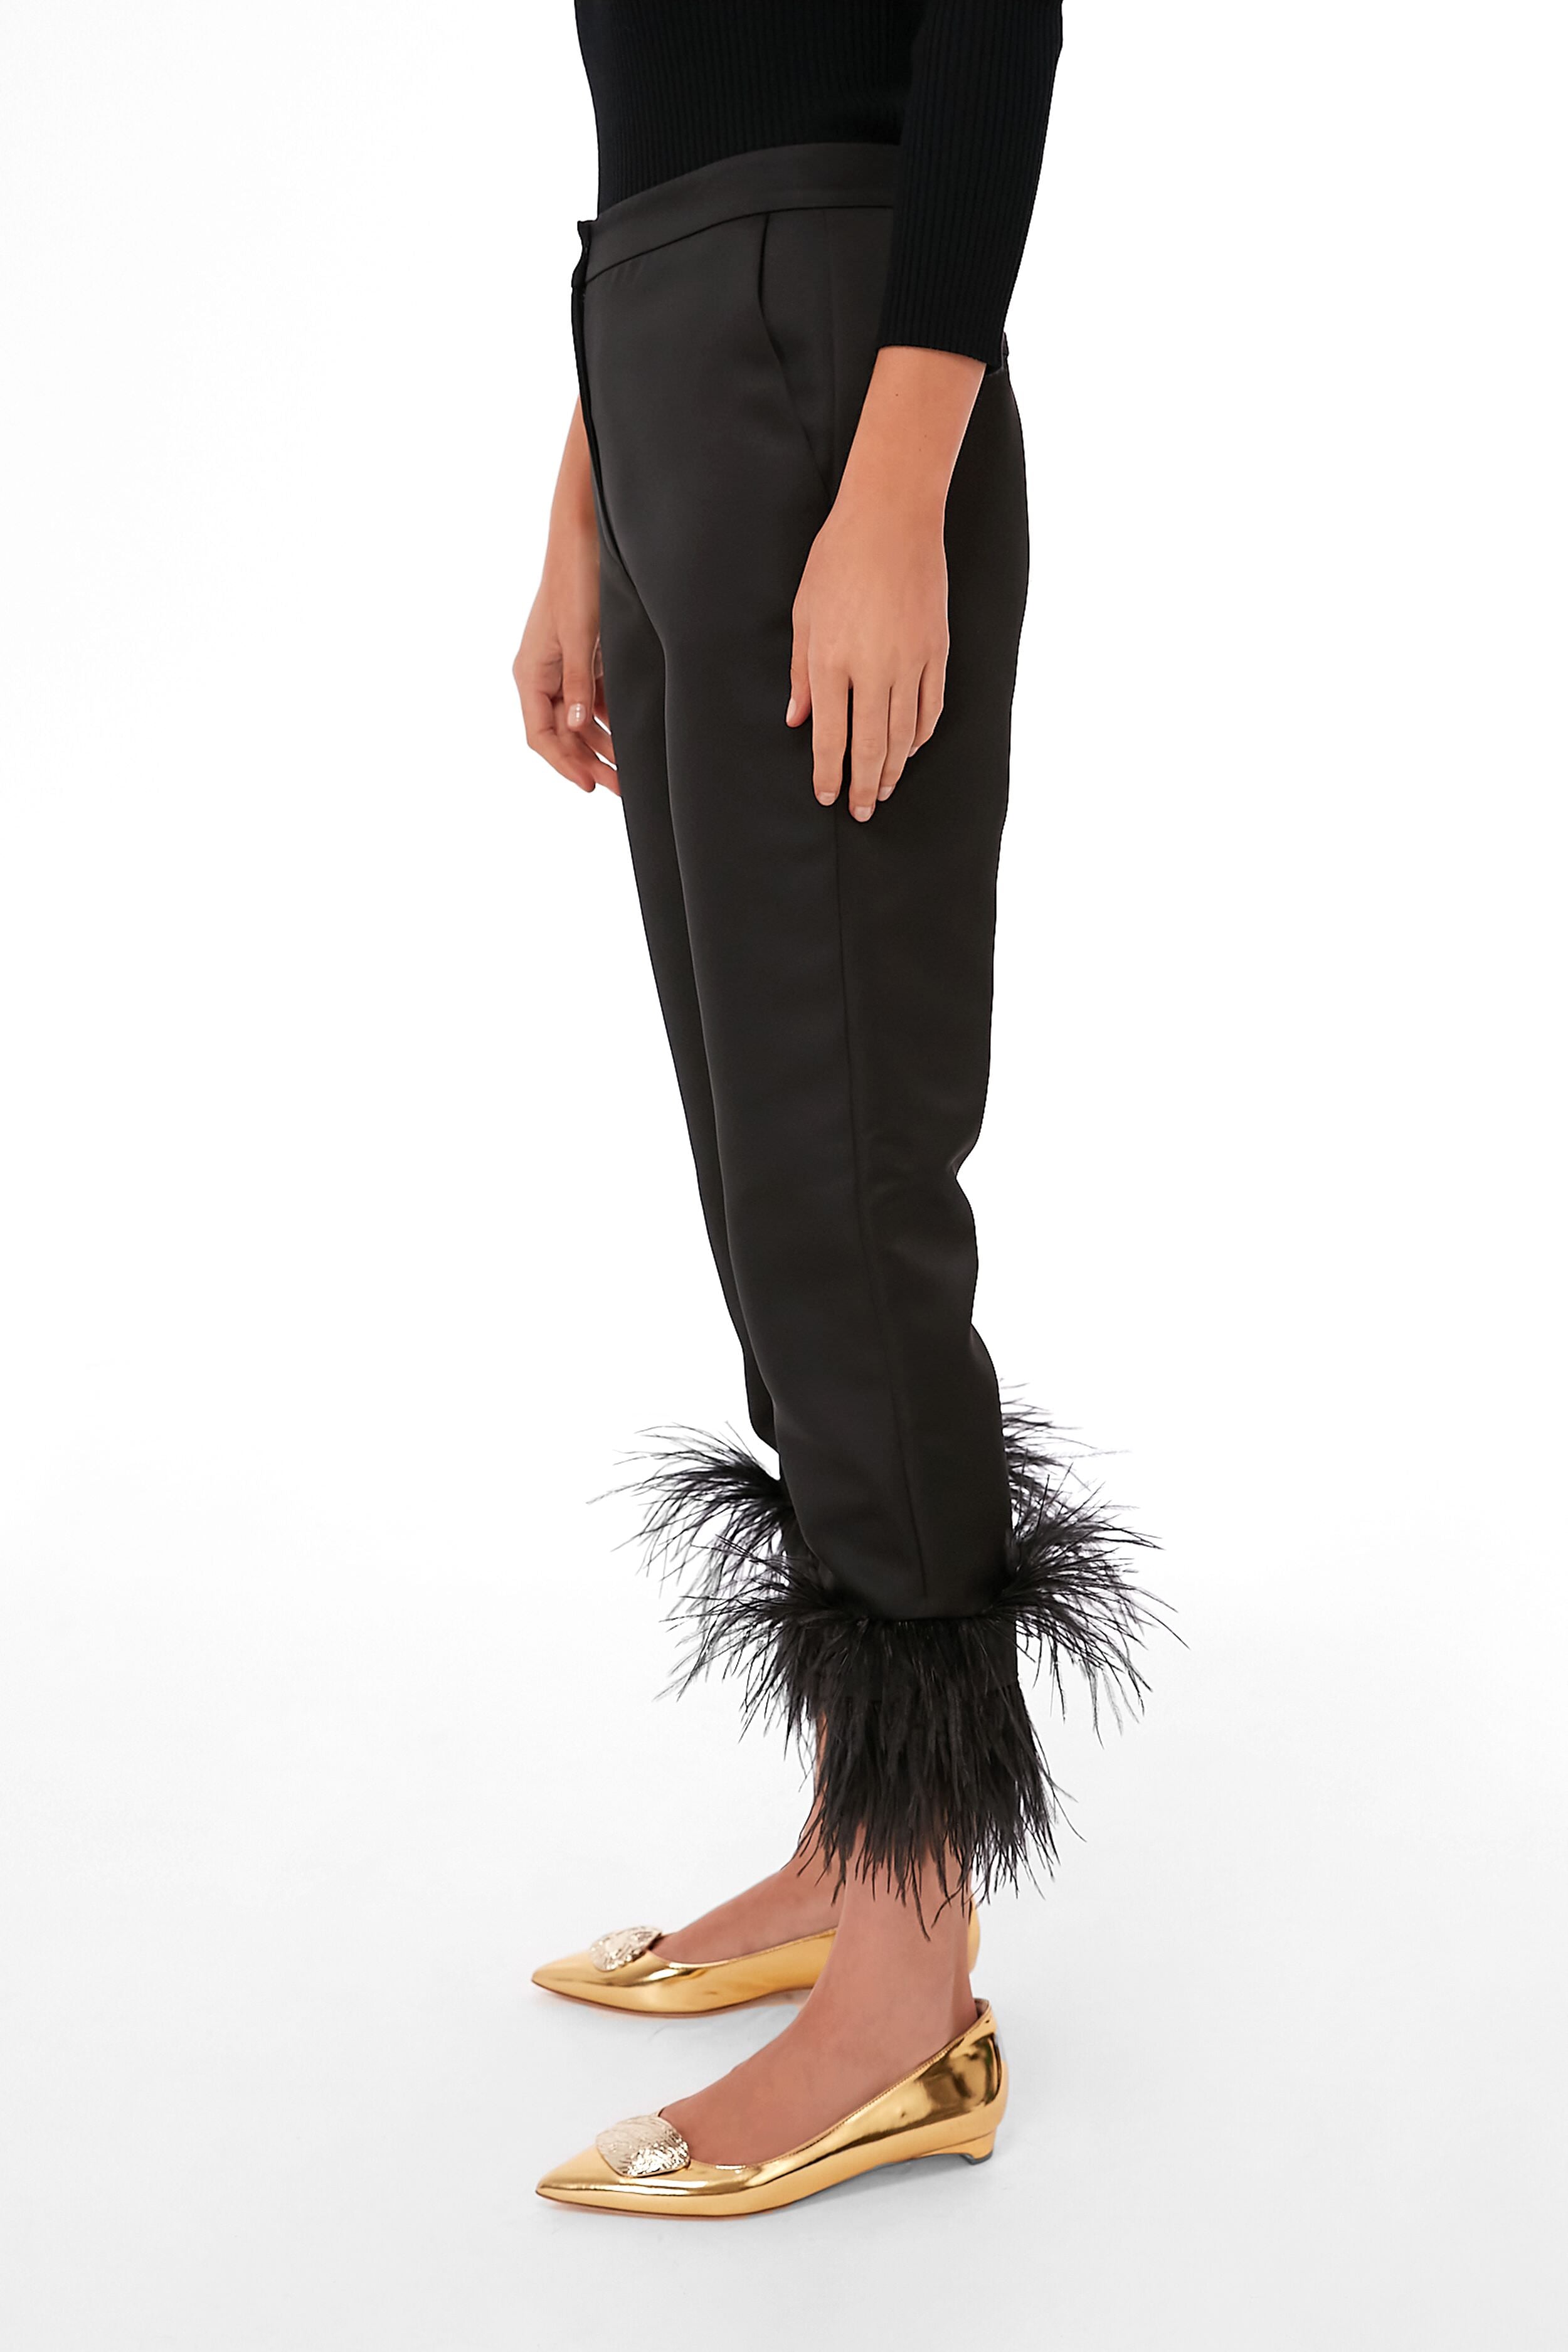 Black Feather Trim Trousers  Annabelle Feather Trim Trouser